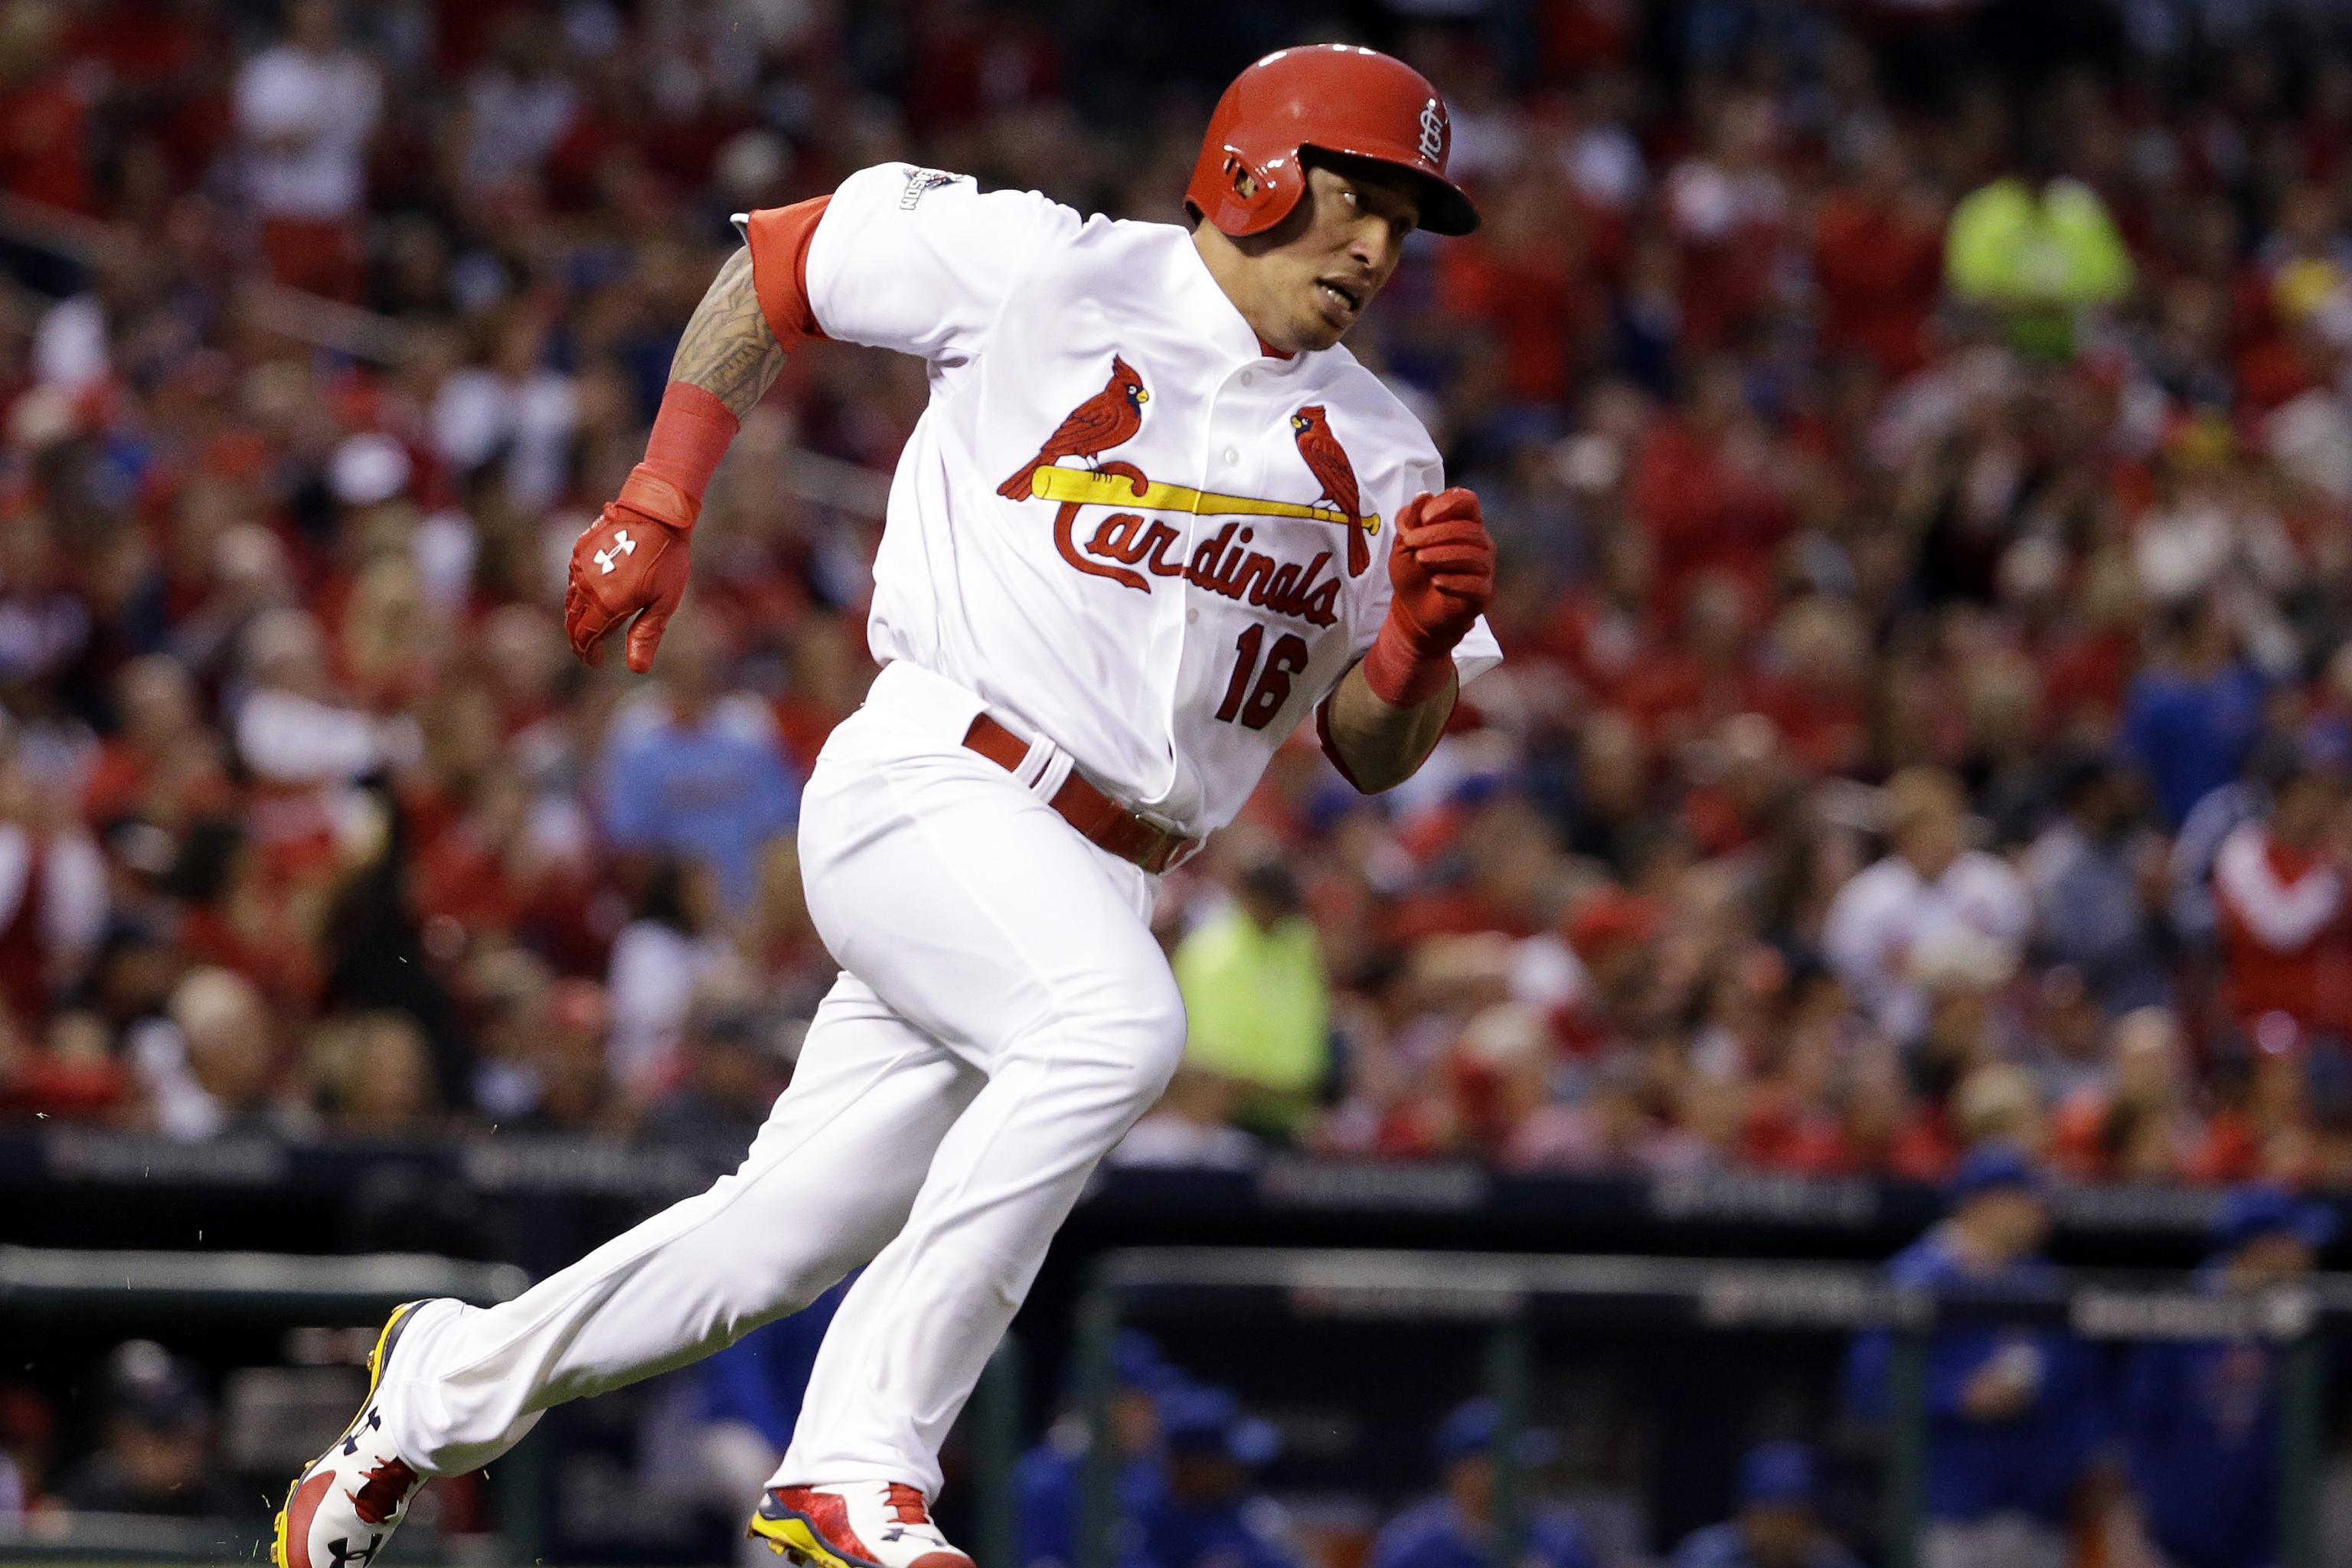 Cardinals Kolten Wong rips Rays for not calling up brother Kean